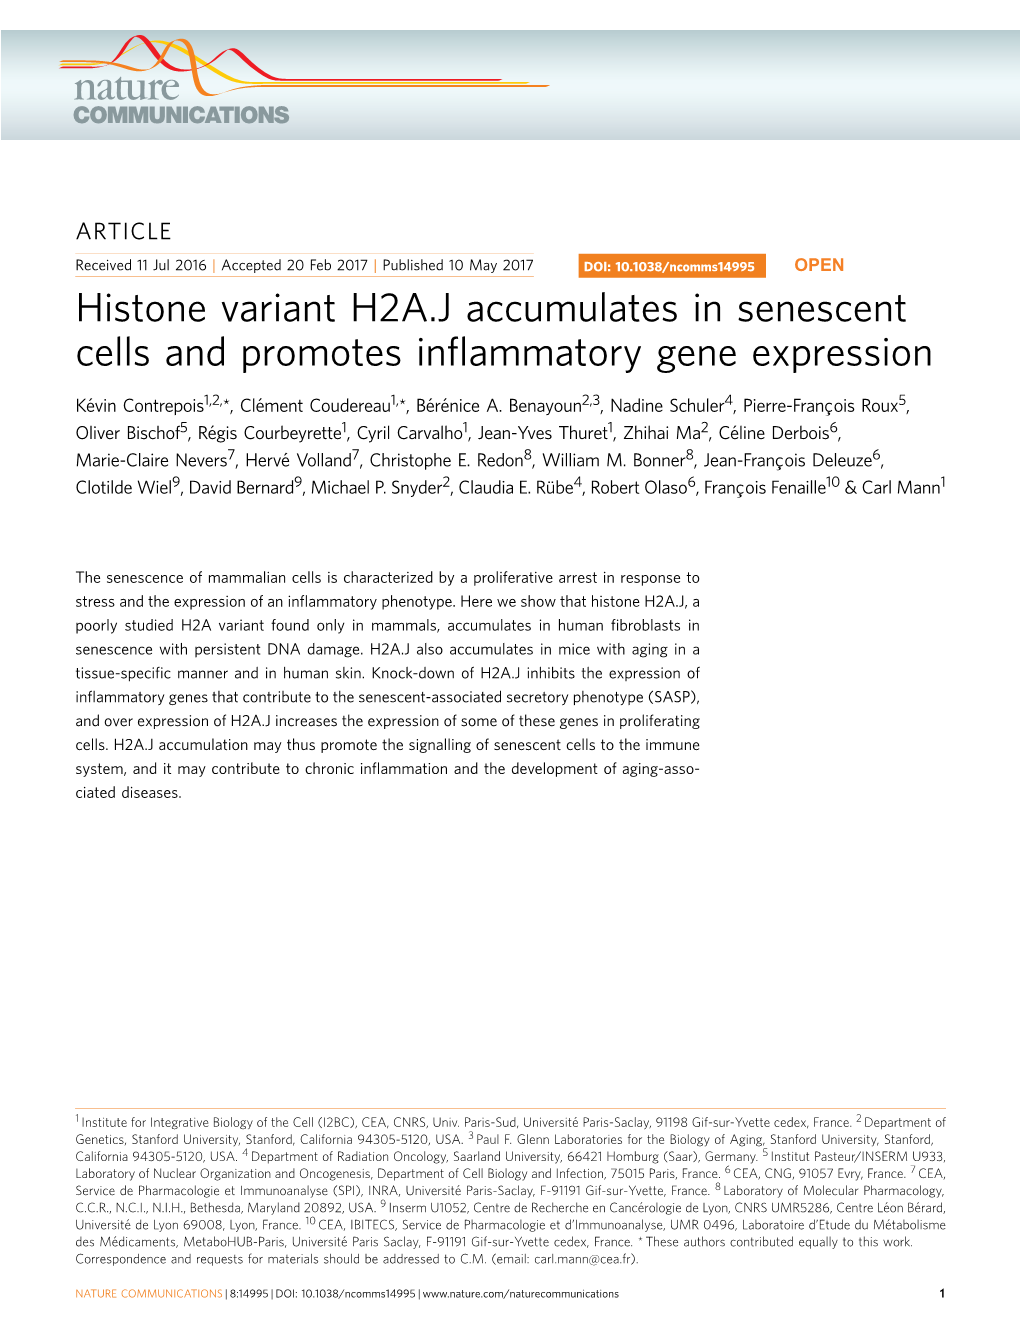 Histone Variant H2A.J Accumulates in Senescent Cells and Promotes Inflammatory Gene Expression